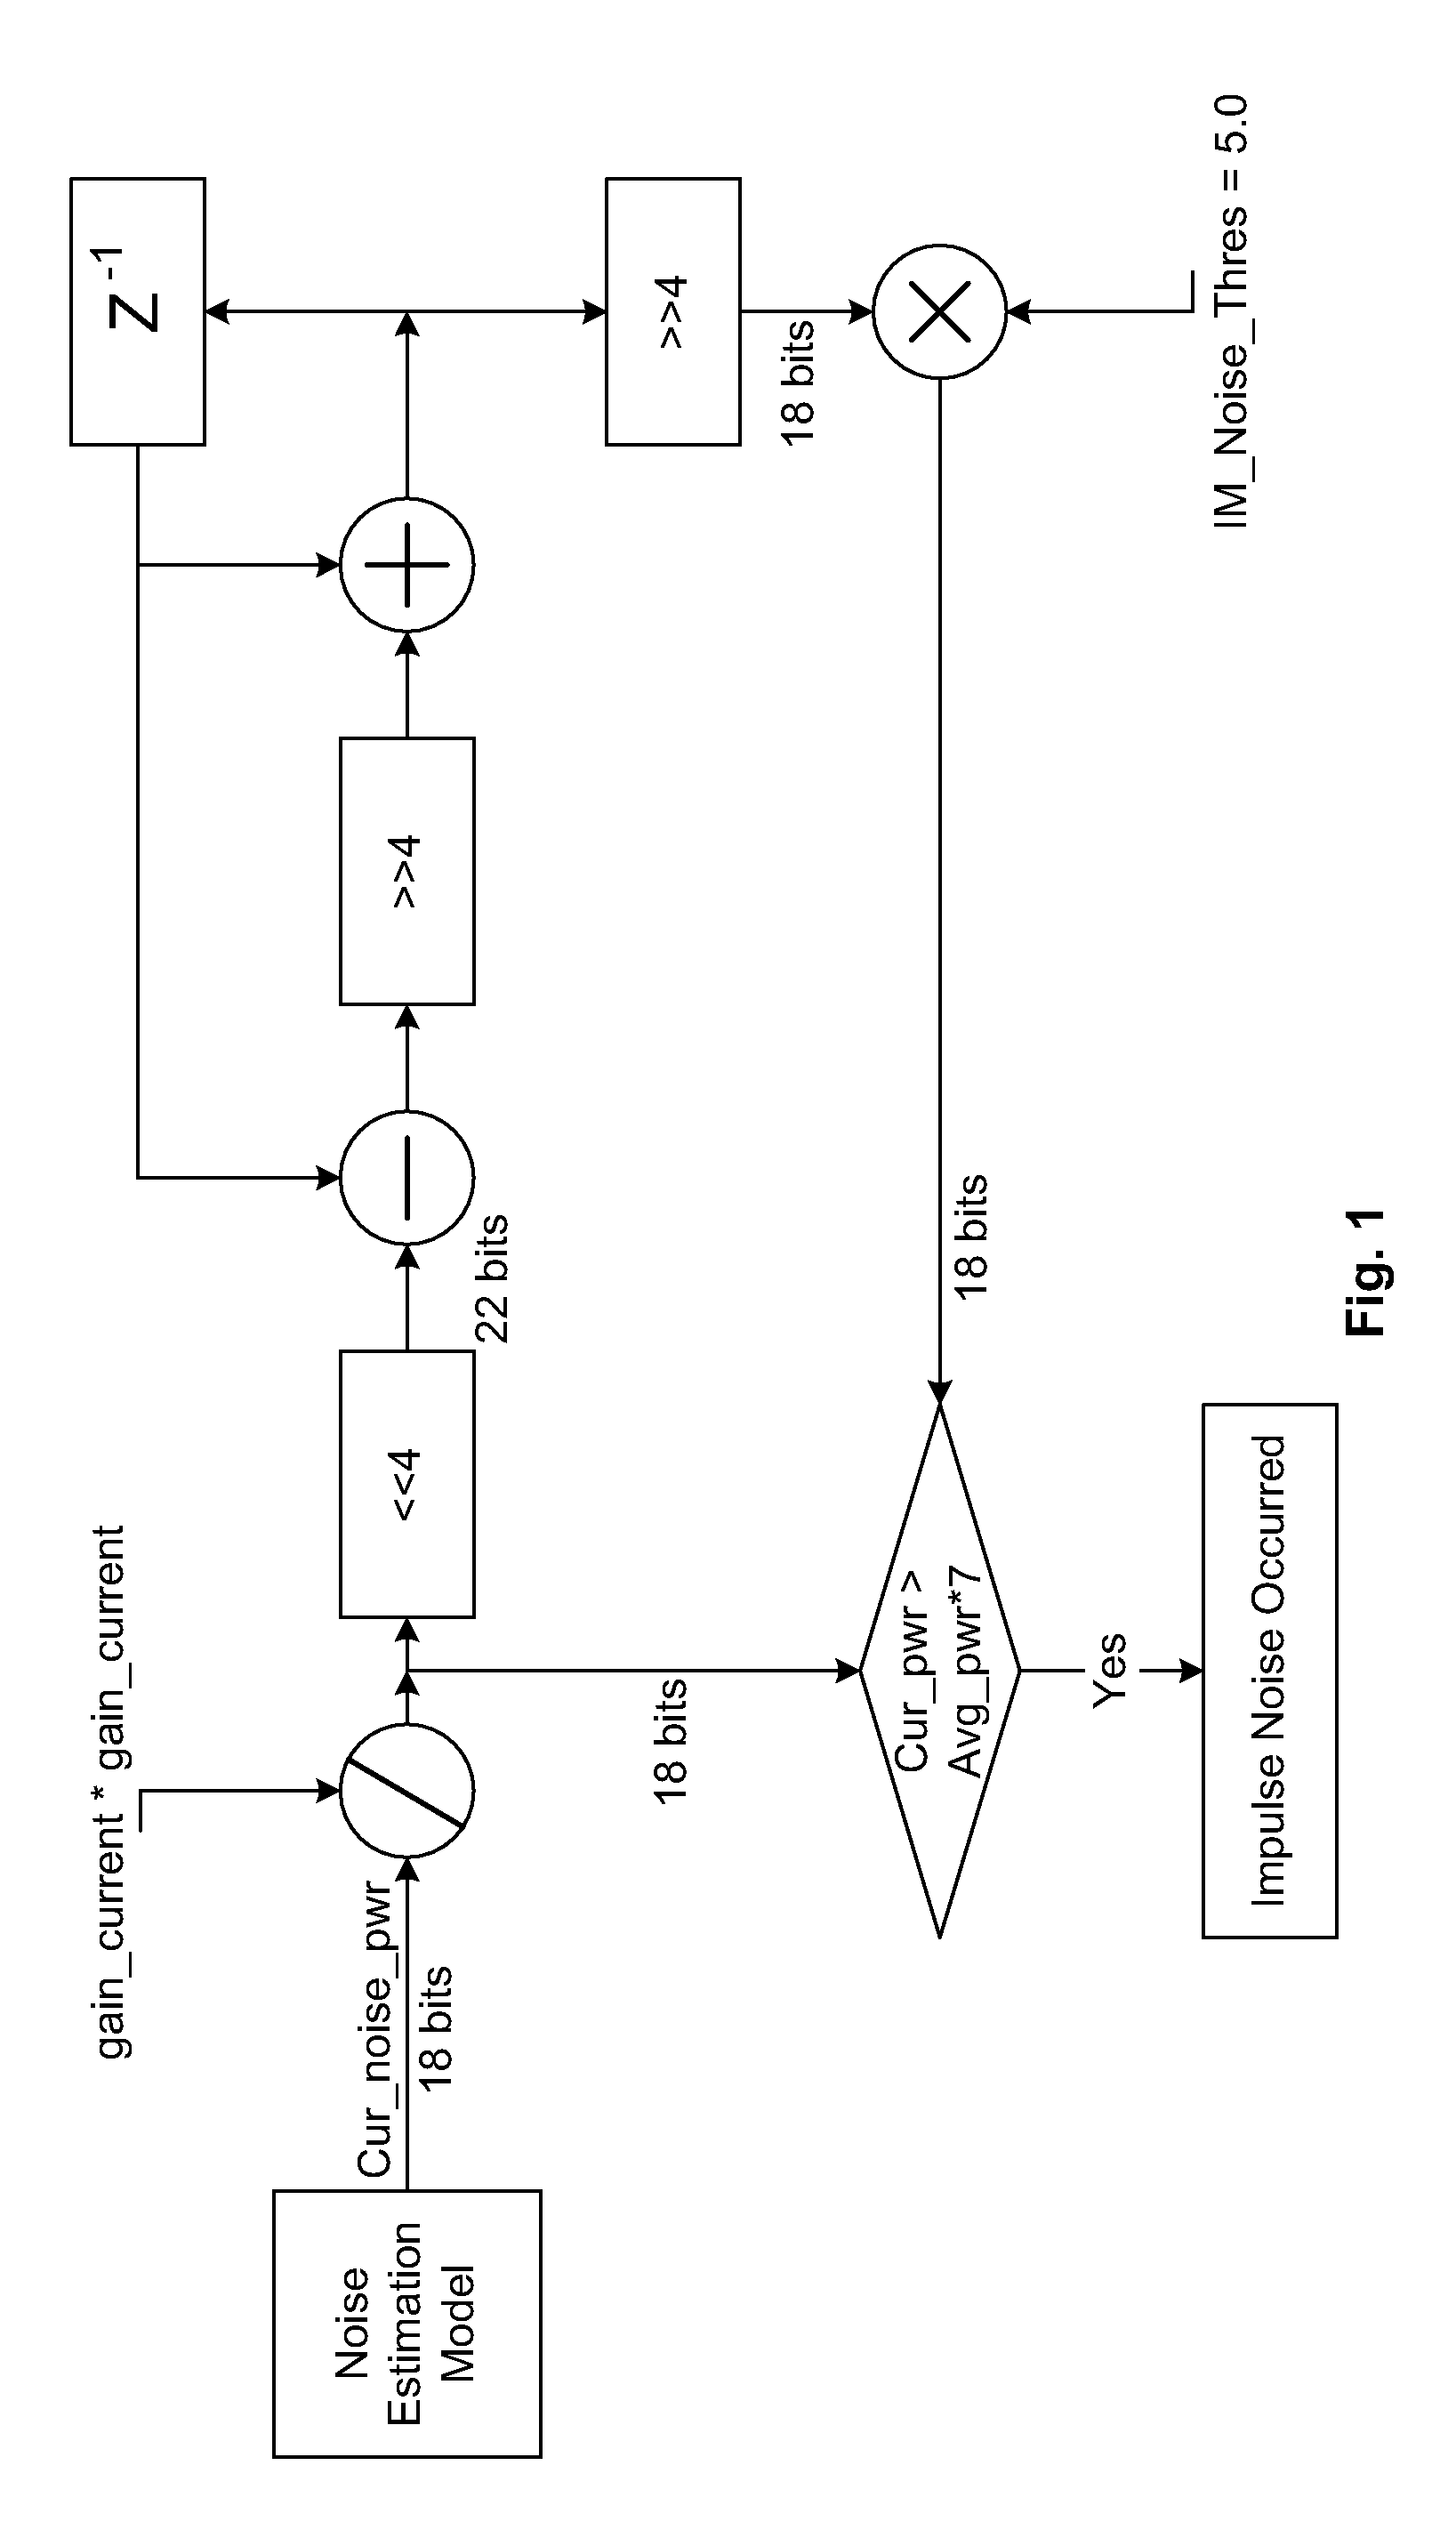 Methods and Systems for Impulse Noise Compensation for OFDM Systems